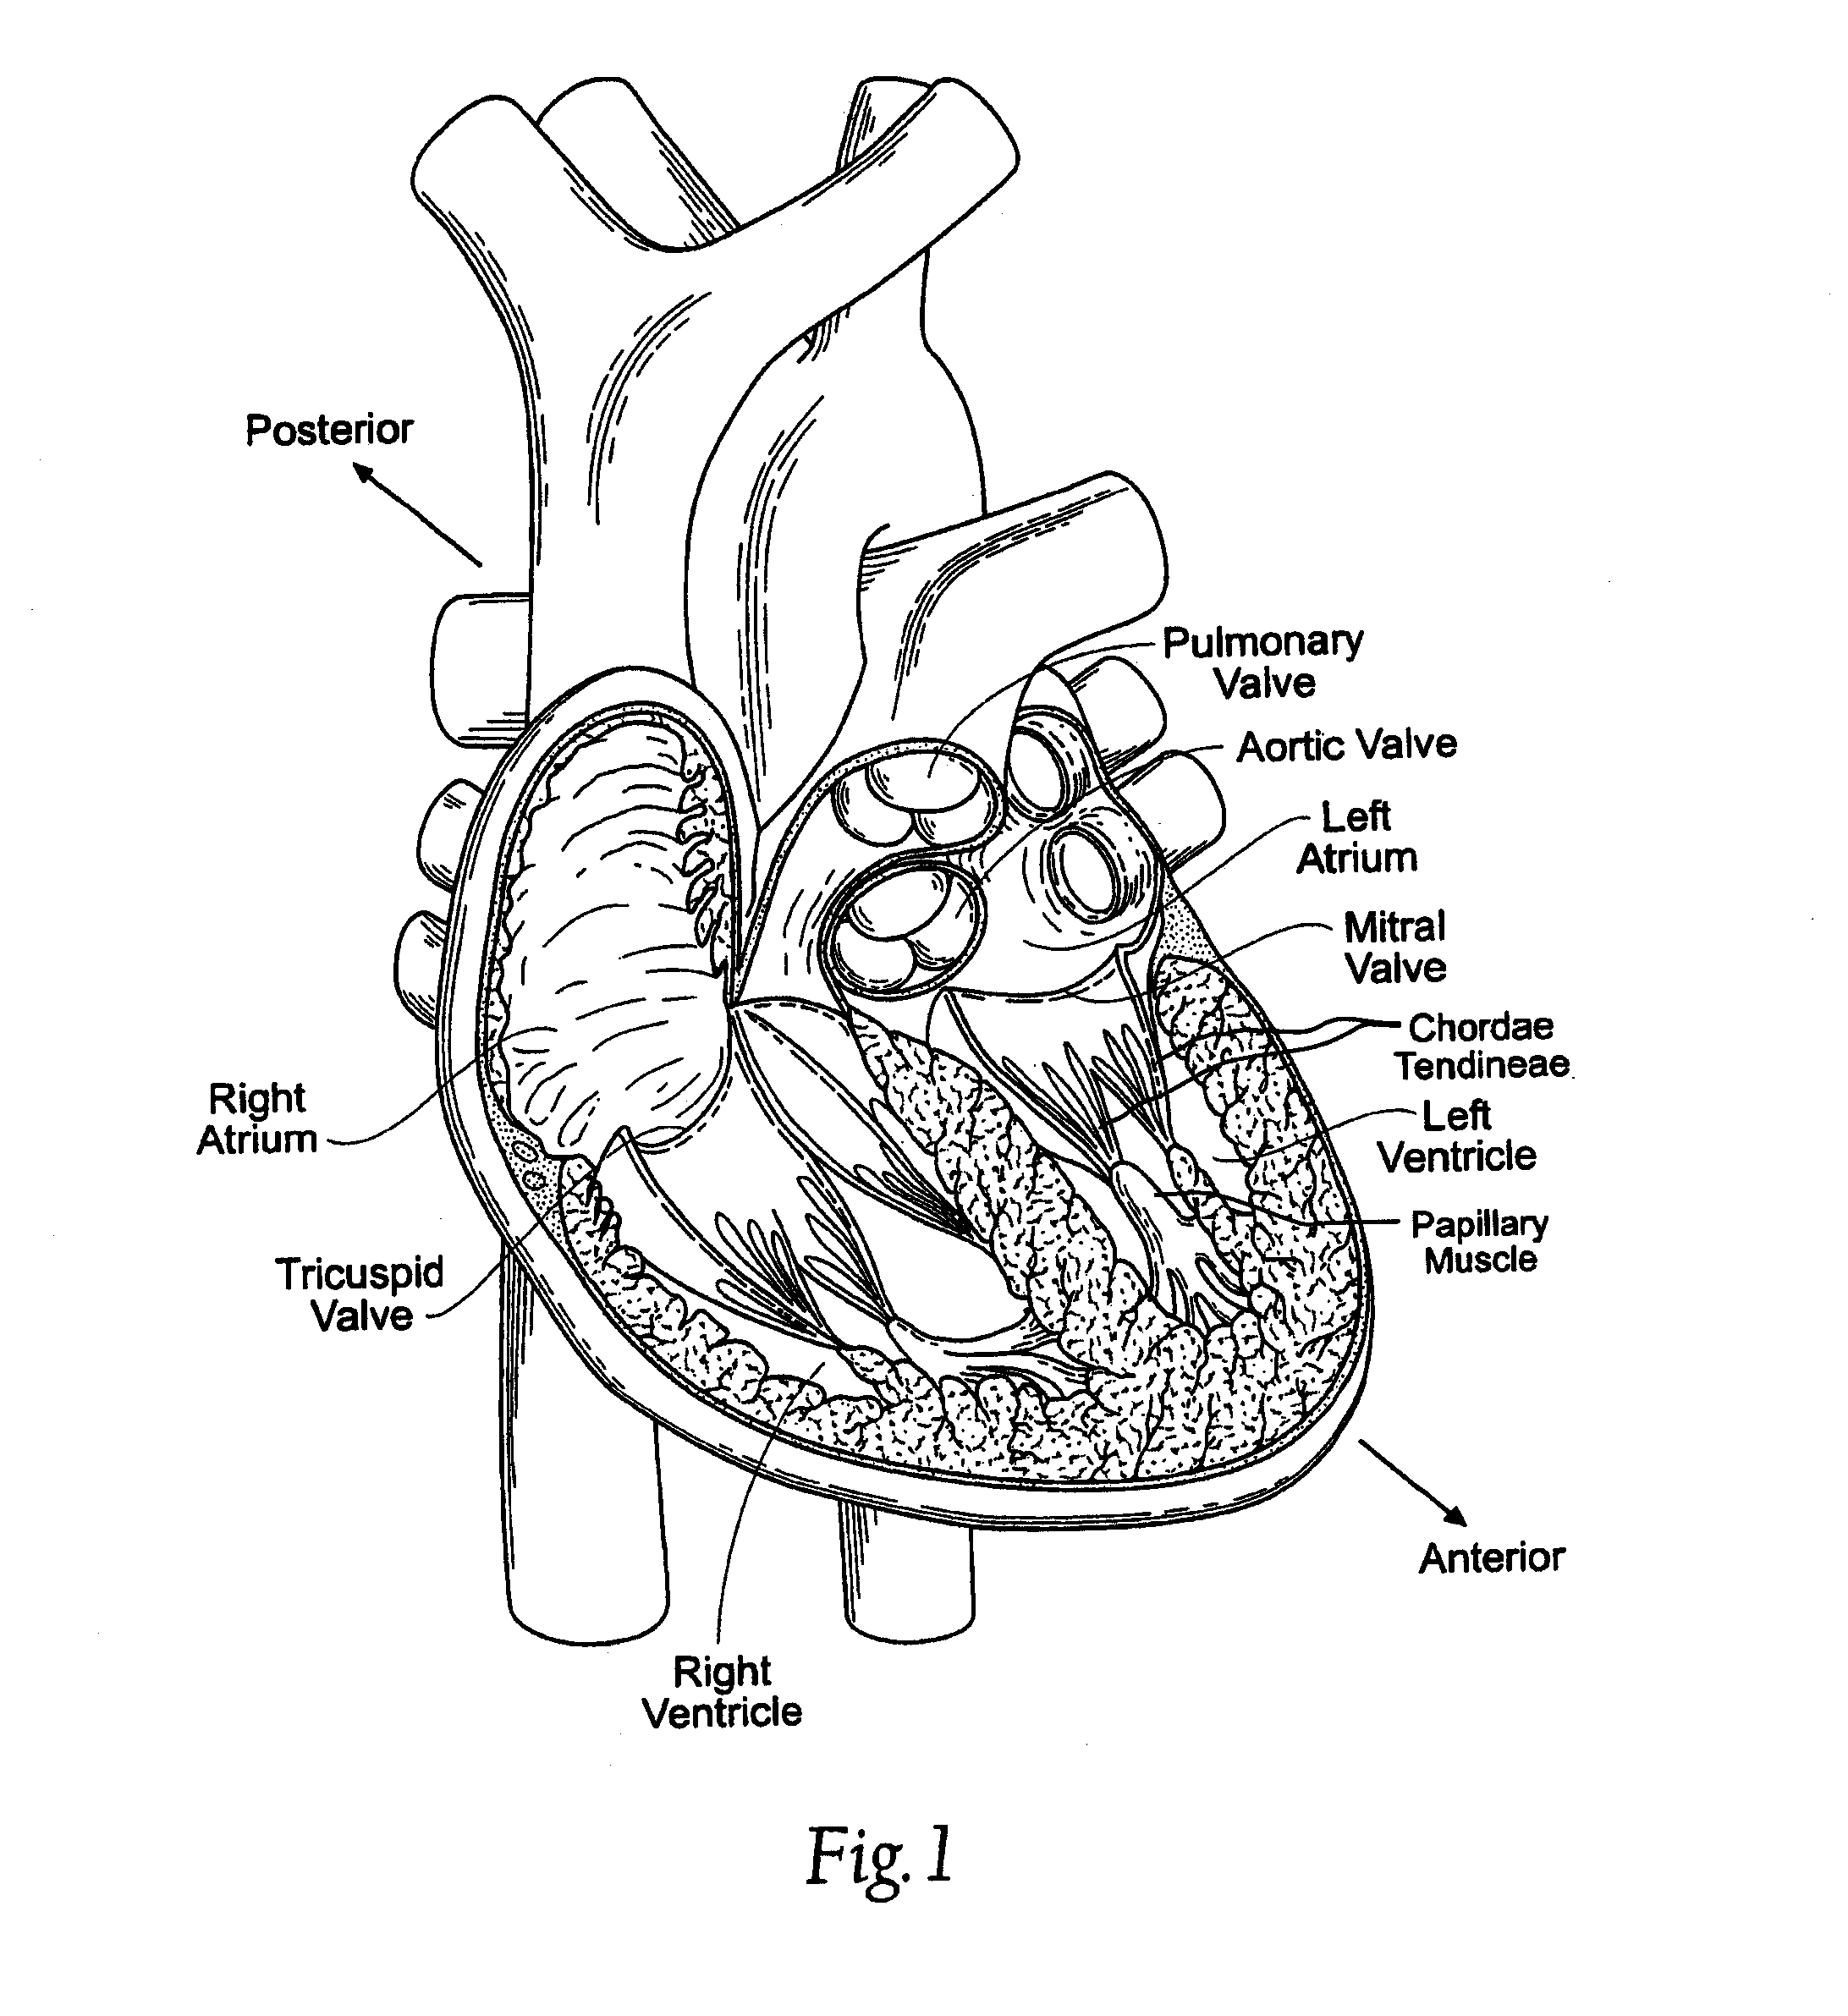 Methods of implanting a heart valve at an aortic annulus